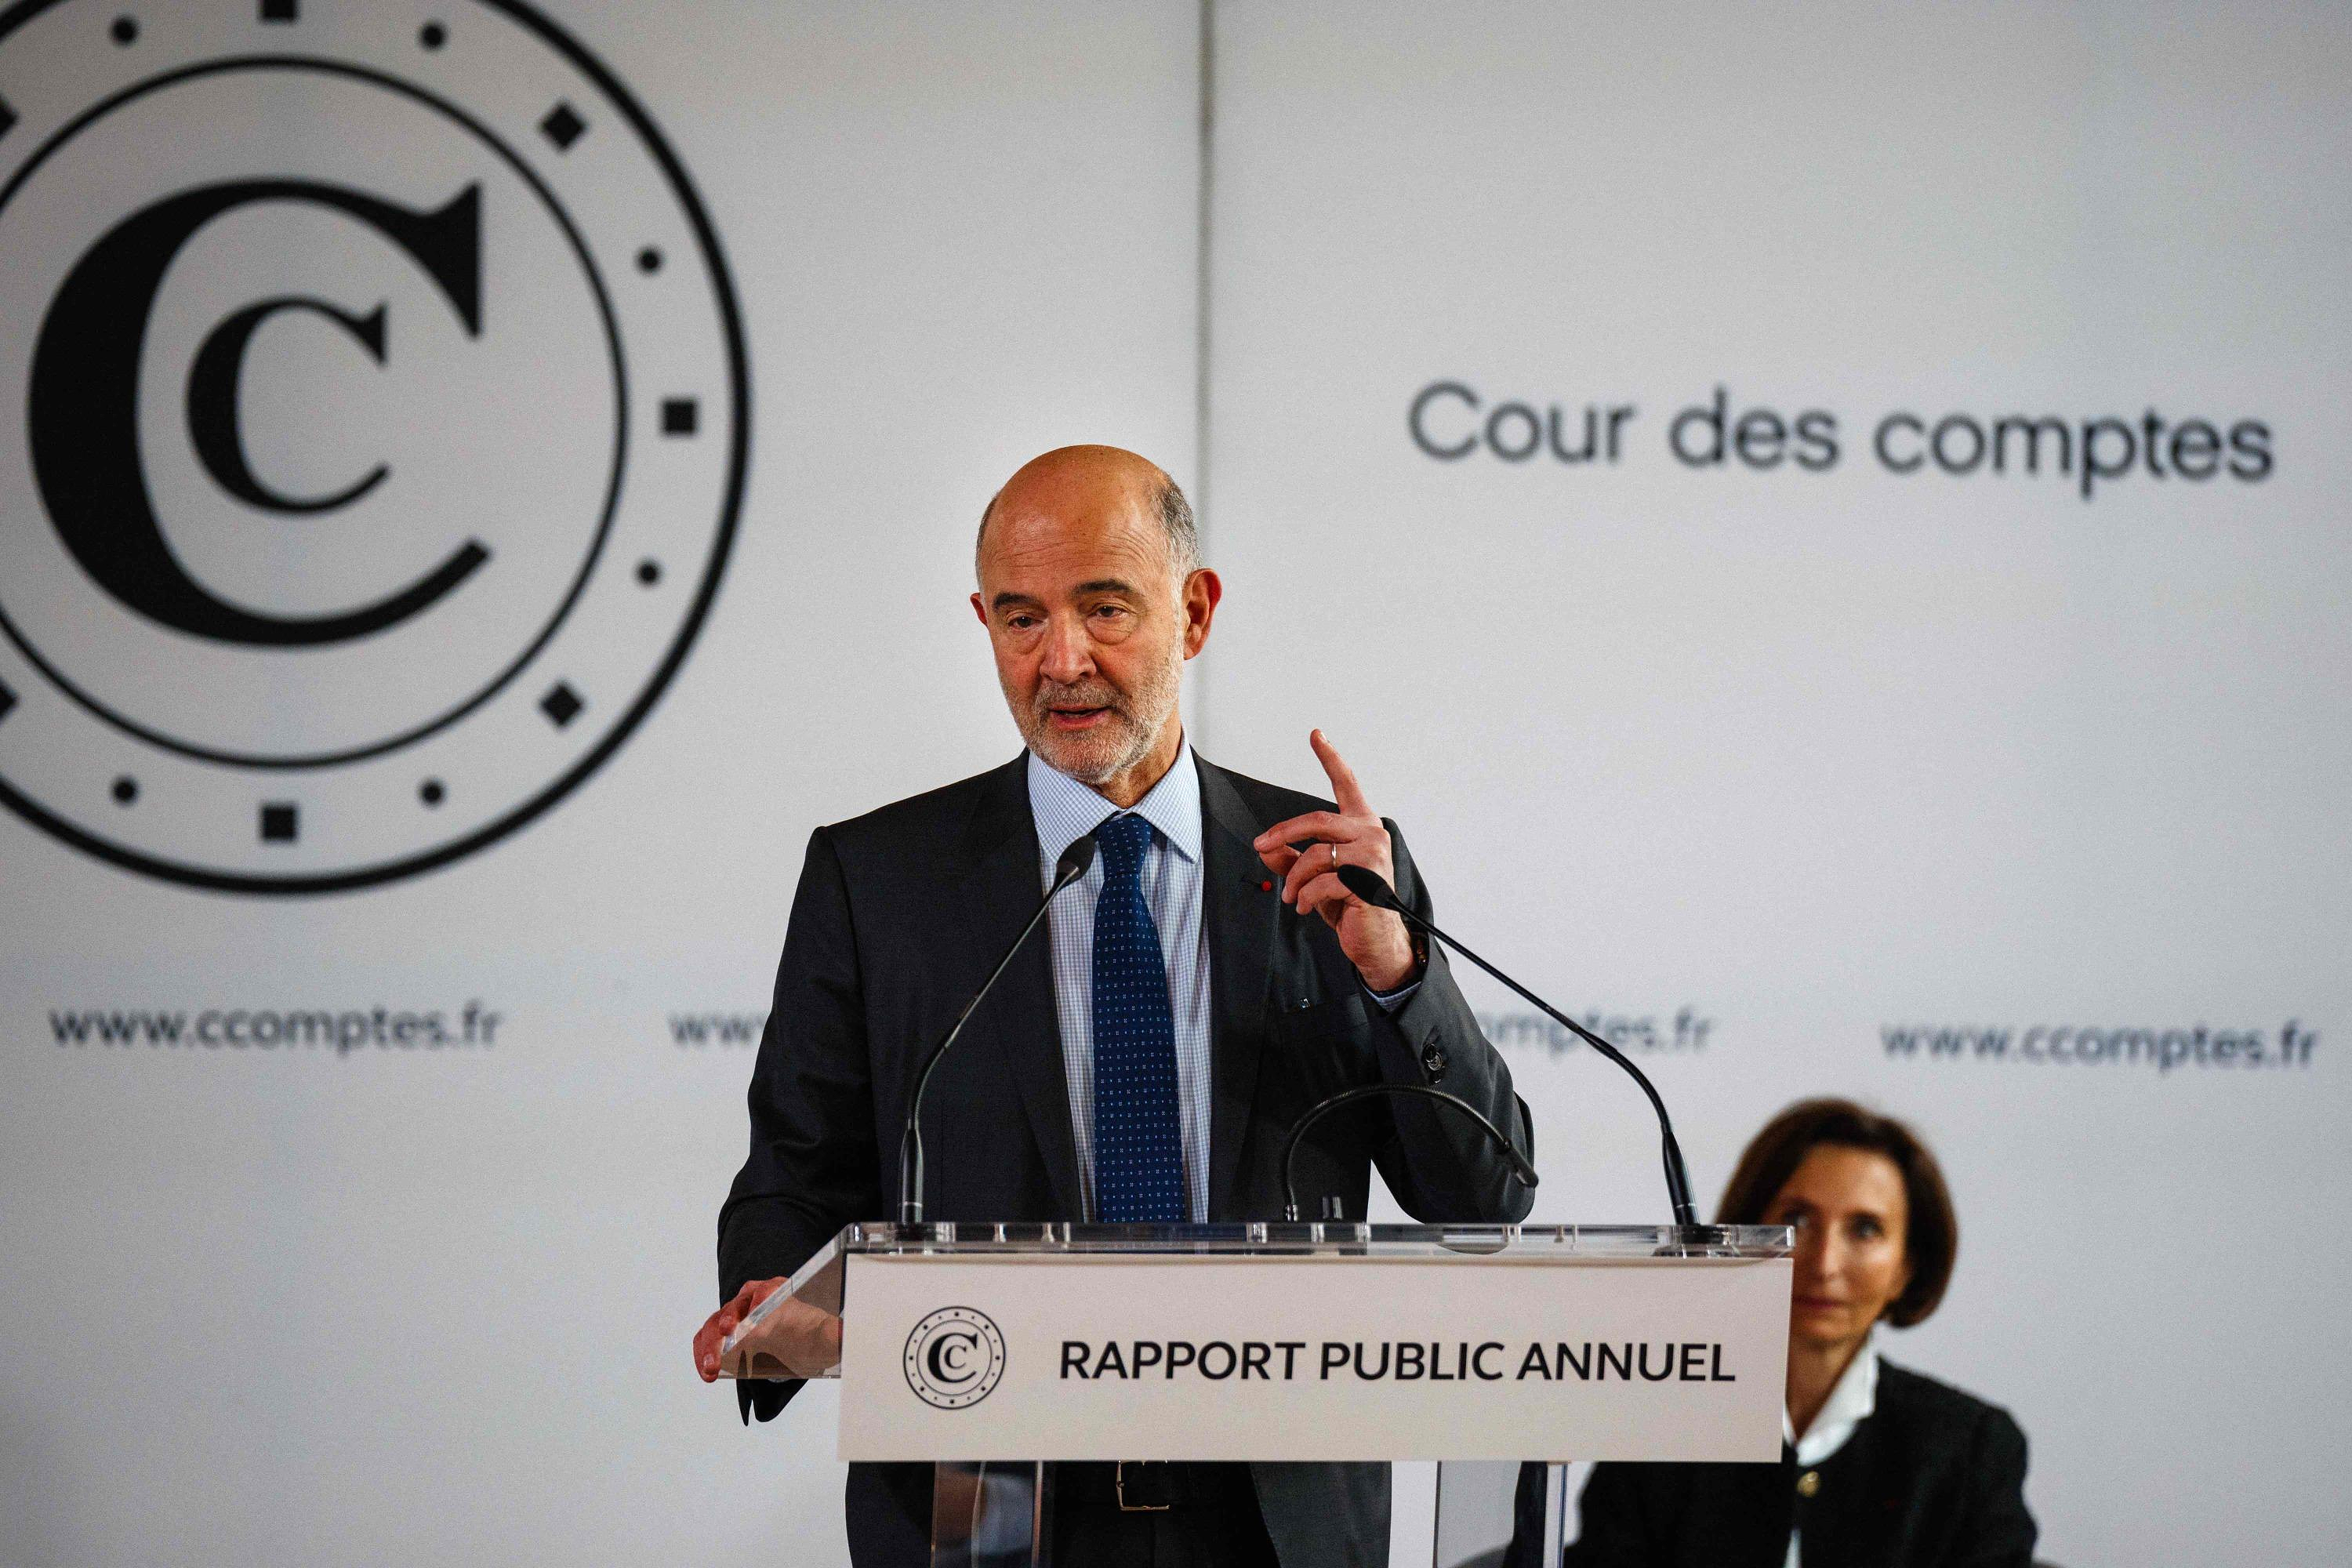 Debt: energy spending puts France “up against the wall”, warns Pierre Moscovici